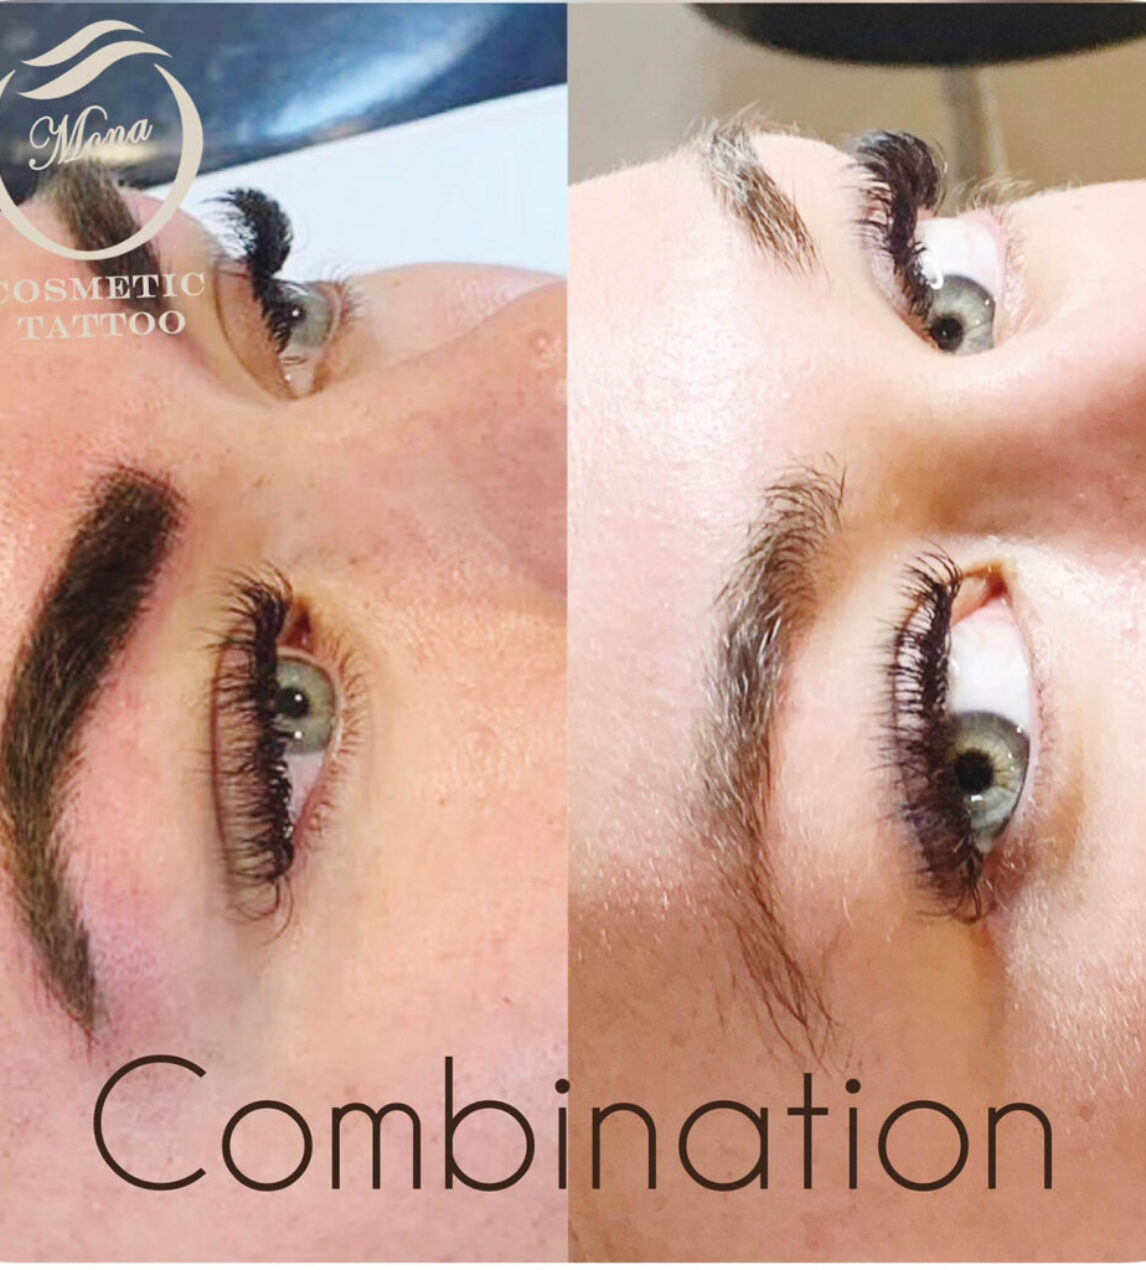     Combination    Permanent makeup has become incredibly popular in the last five to ten years. In fact it has become so popular, even Vogue magazine has published an article about it. Since it is so convenient to have, busy women in all walks of life are getting permanent makeup, including many famous women.   